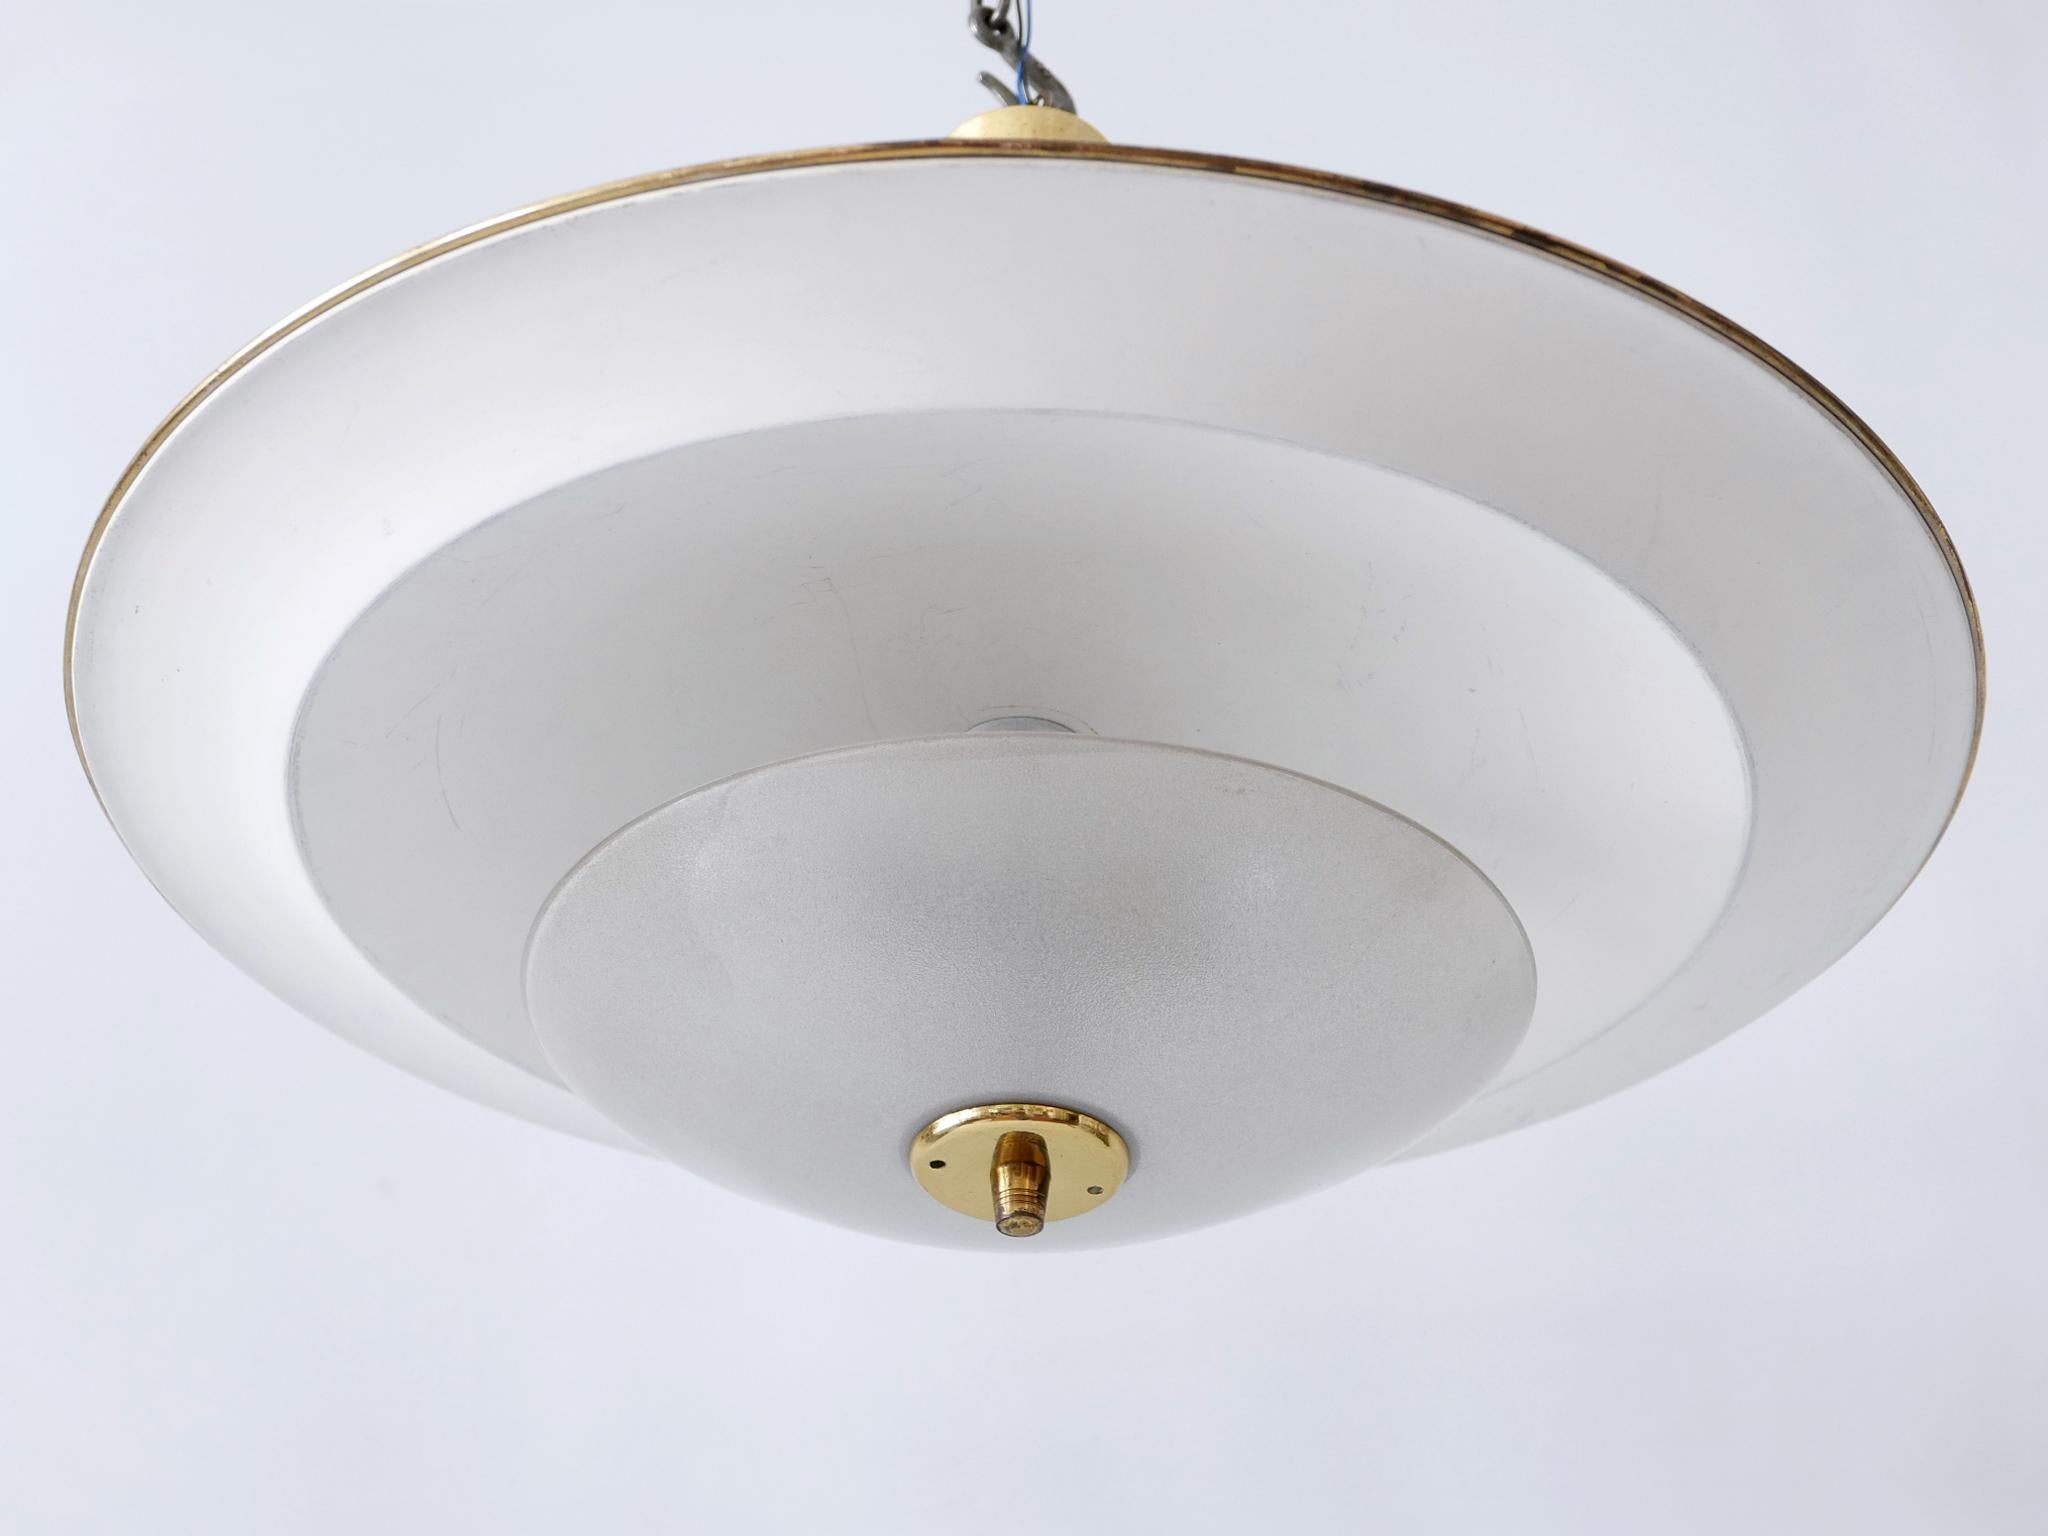 Large Mid-Century Modern 'Ufo' Ceiling Light or Pendant Lamp Germany 1950s № 1 For Sale 9